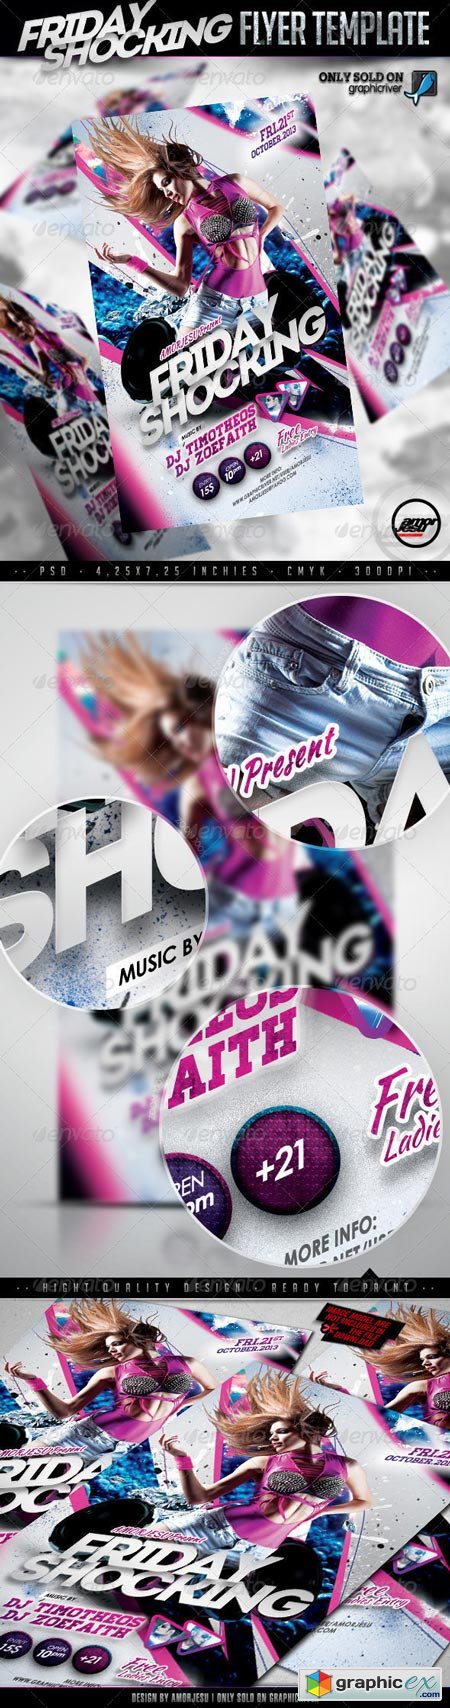 Friday Shocking Flyer Template 5425964